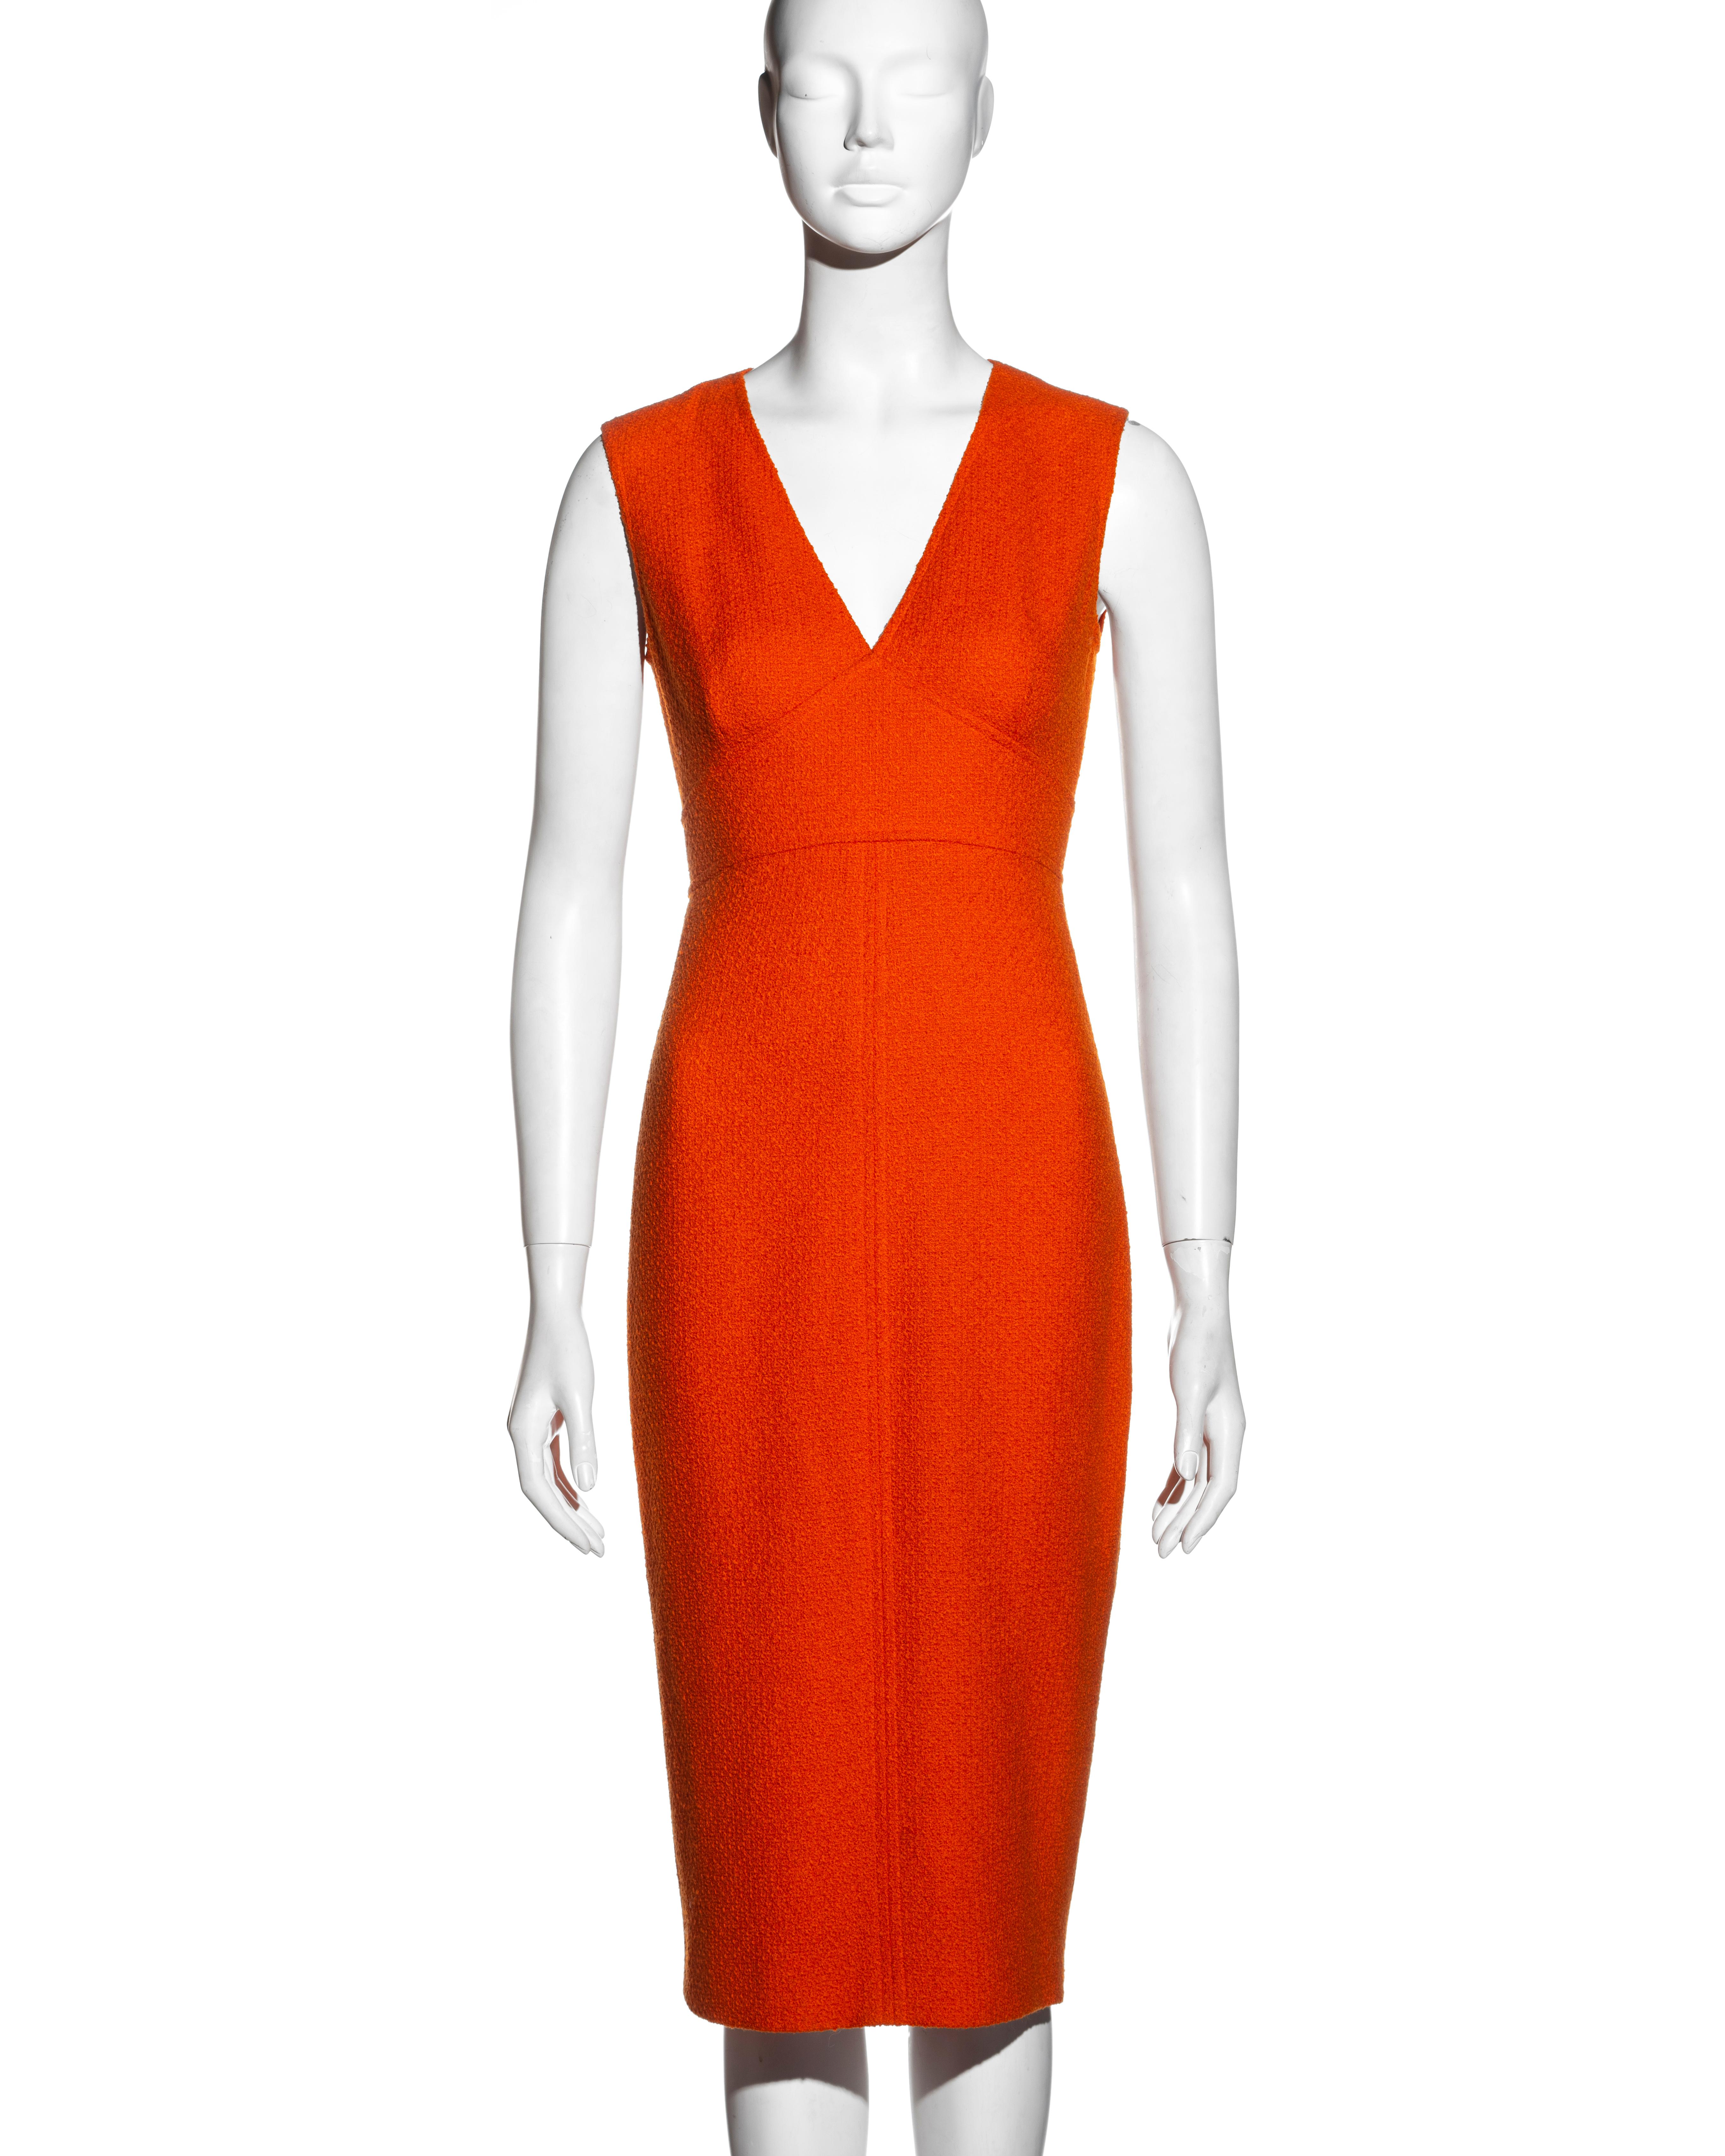 Chanel by Karl Lagerfeld orange bouclé wool dress and jacket set, fw 1995 For Sale 3